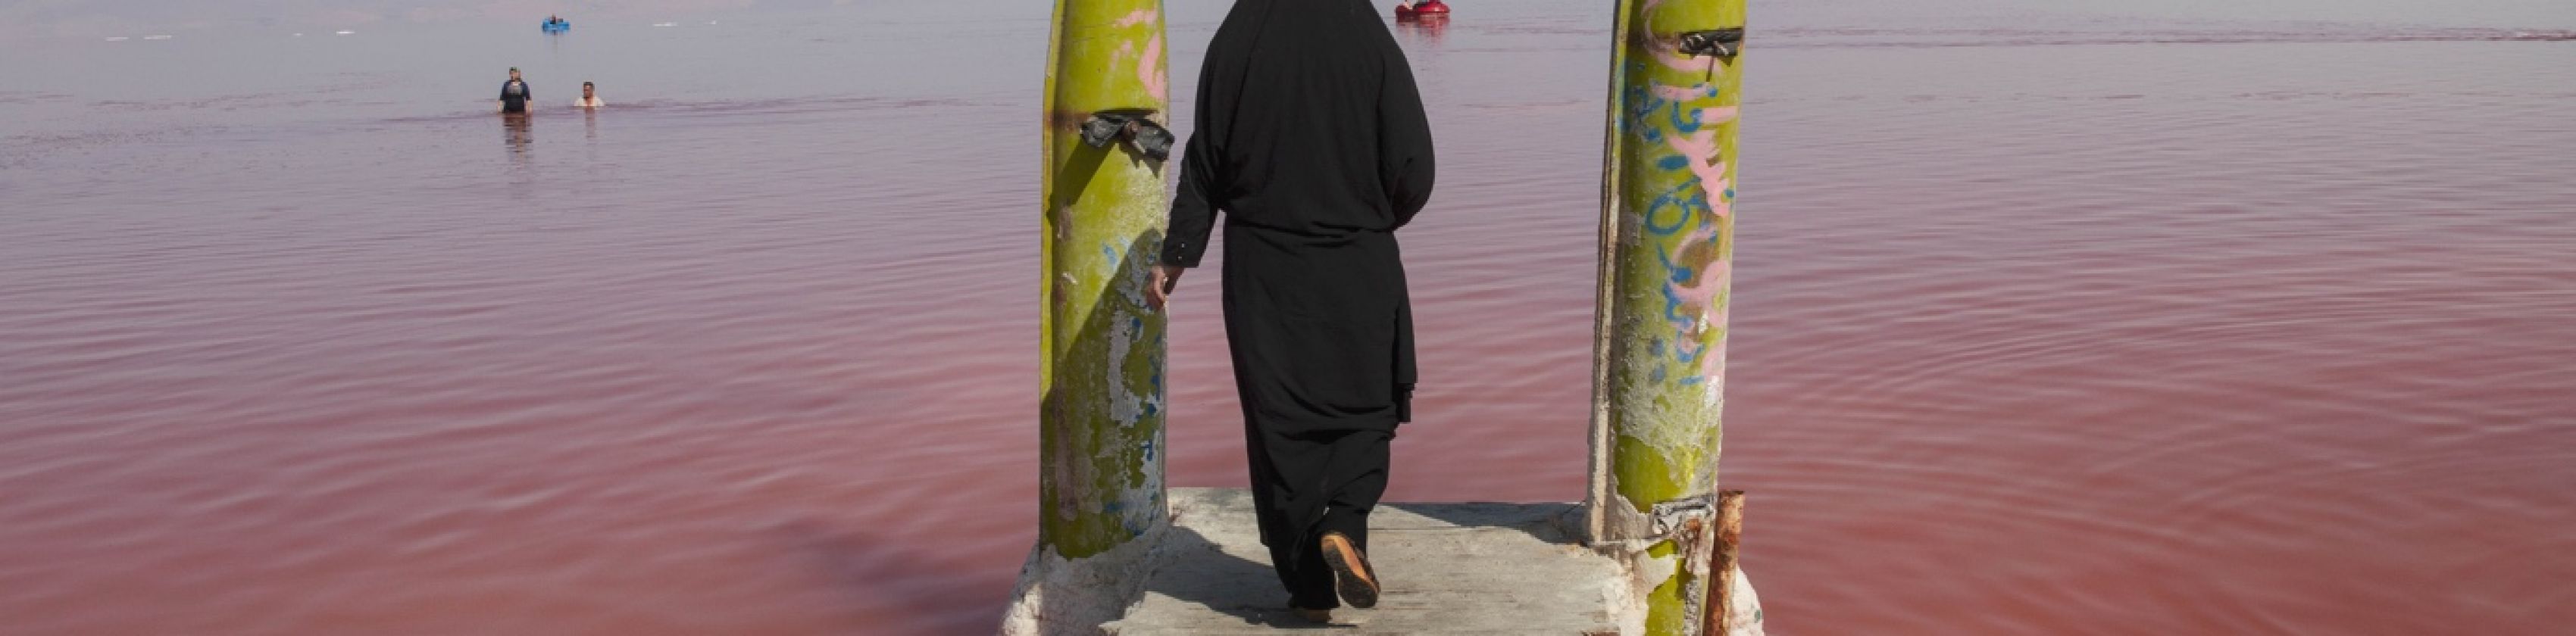 Solmaz Daryani, The Eyes of Earth Series, (The Death of Lake Urmia), (2014 ongoing), courtesy the artist